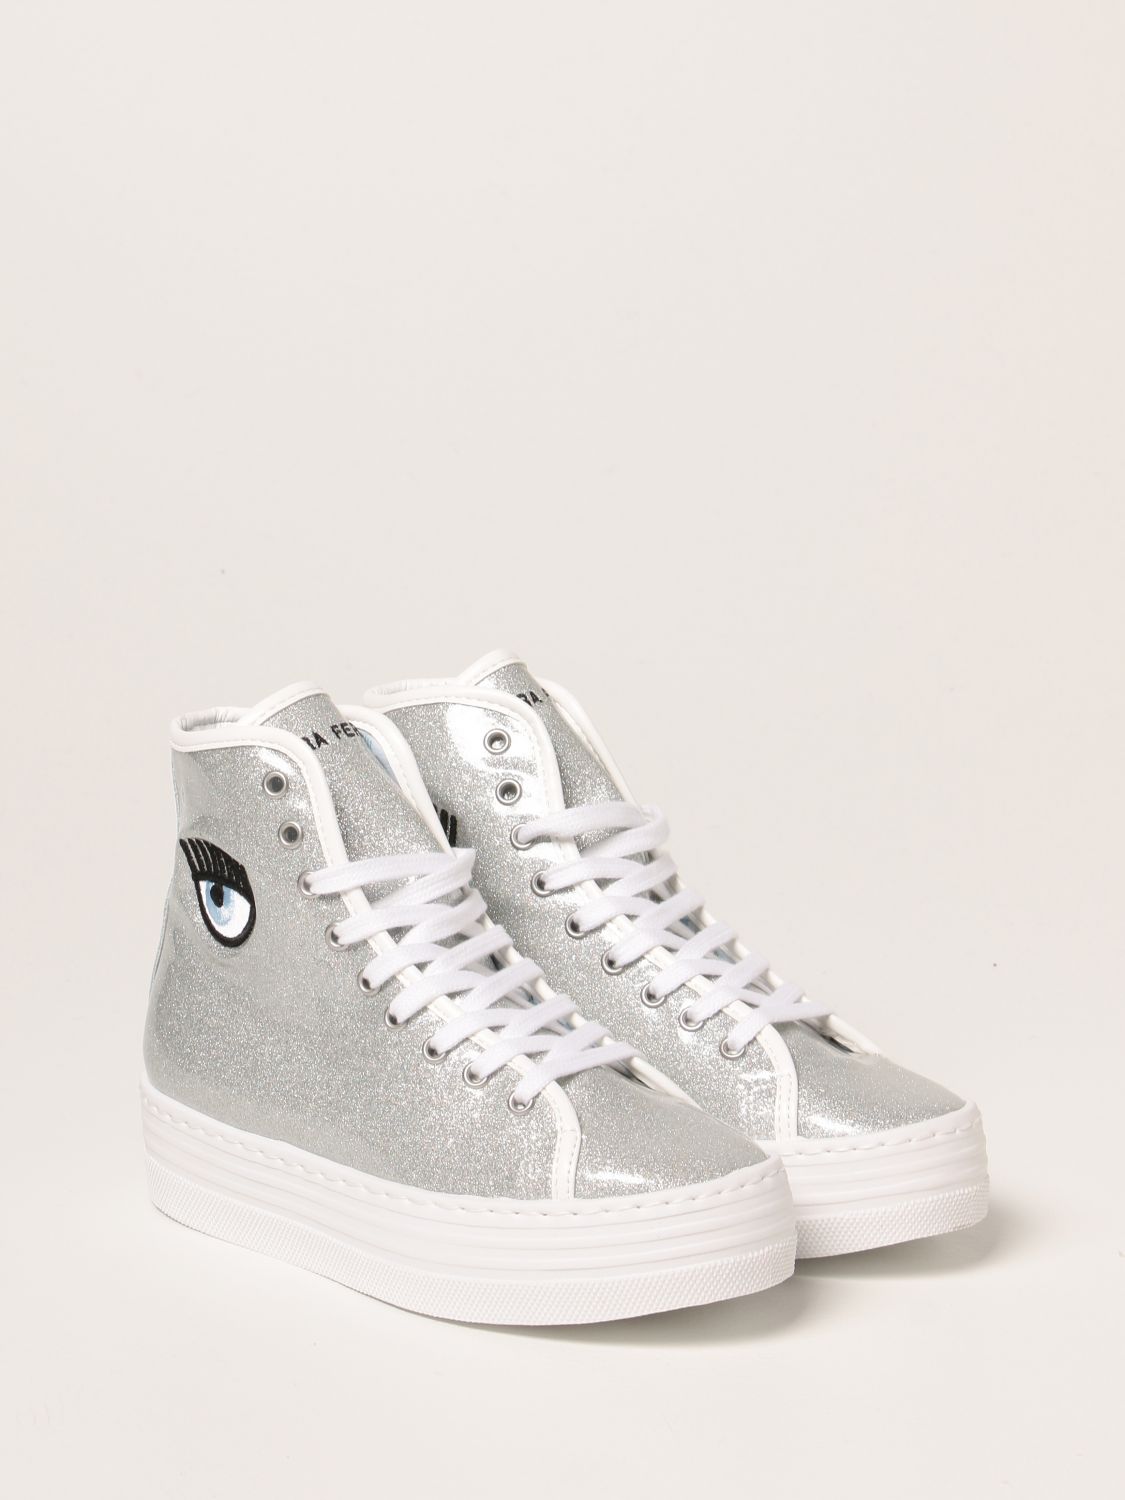 in the meantime Constitution Pacific CHIARA FERRAGNI: glitter sneakers with Eye Flirting logo - Silver | Chiara  Ferragni shoes CFB090 online on GIGLIO.COM